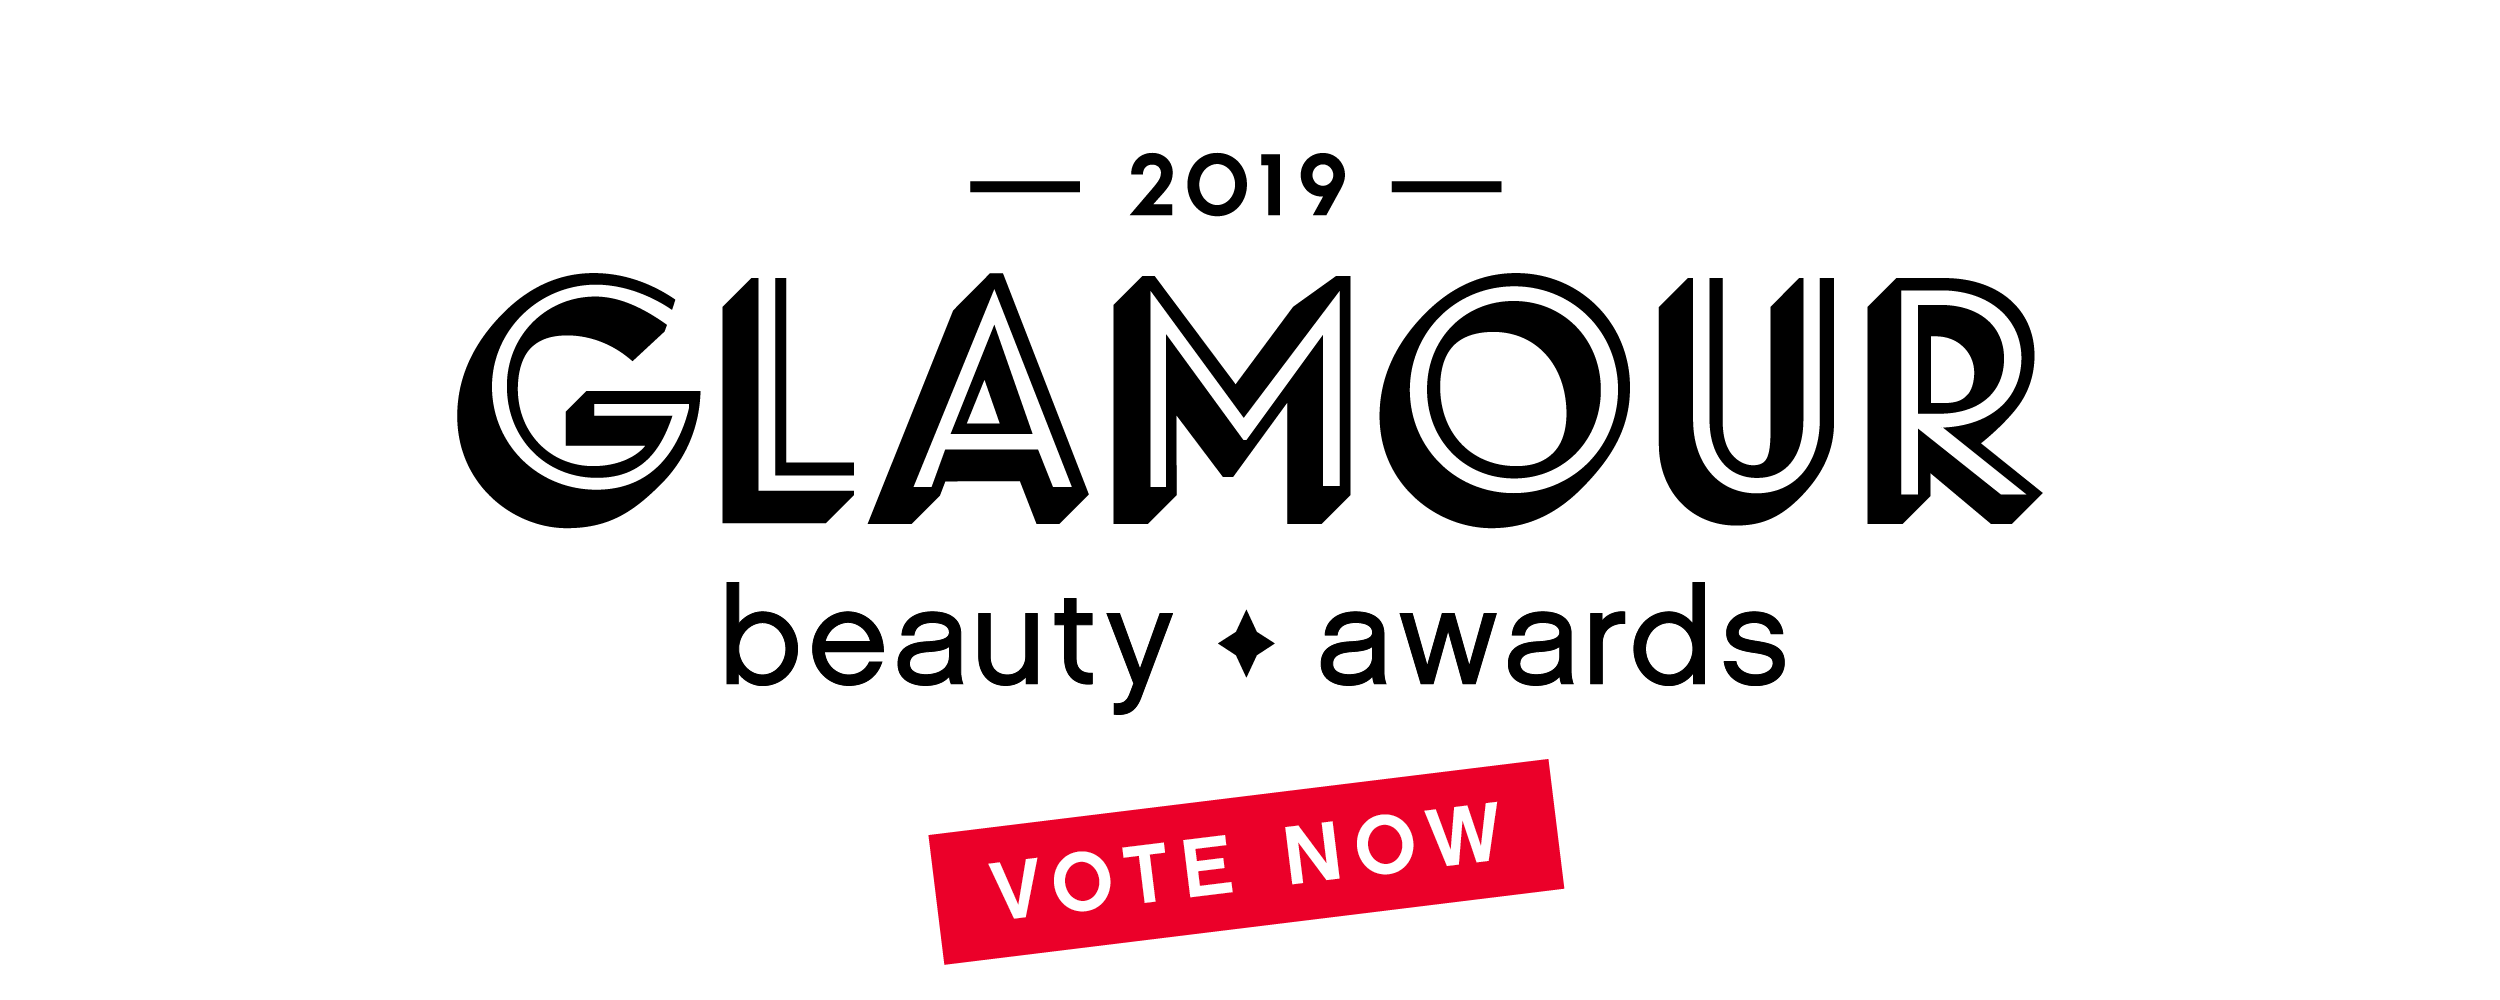 Glamour Logo - Vote for the 2019 'Glamour' Beauty Awards Readers' Choice Winners ...